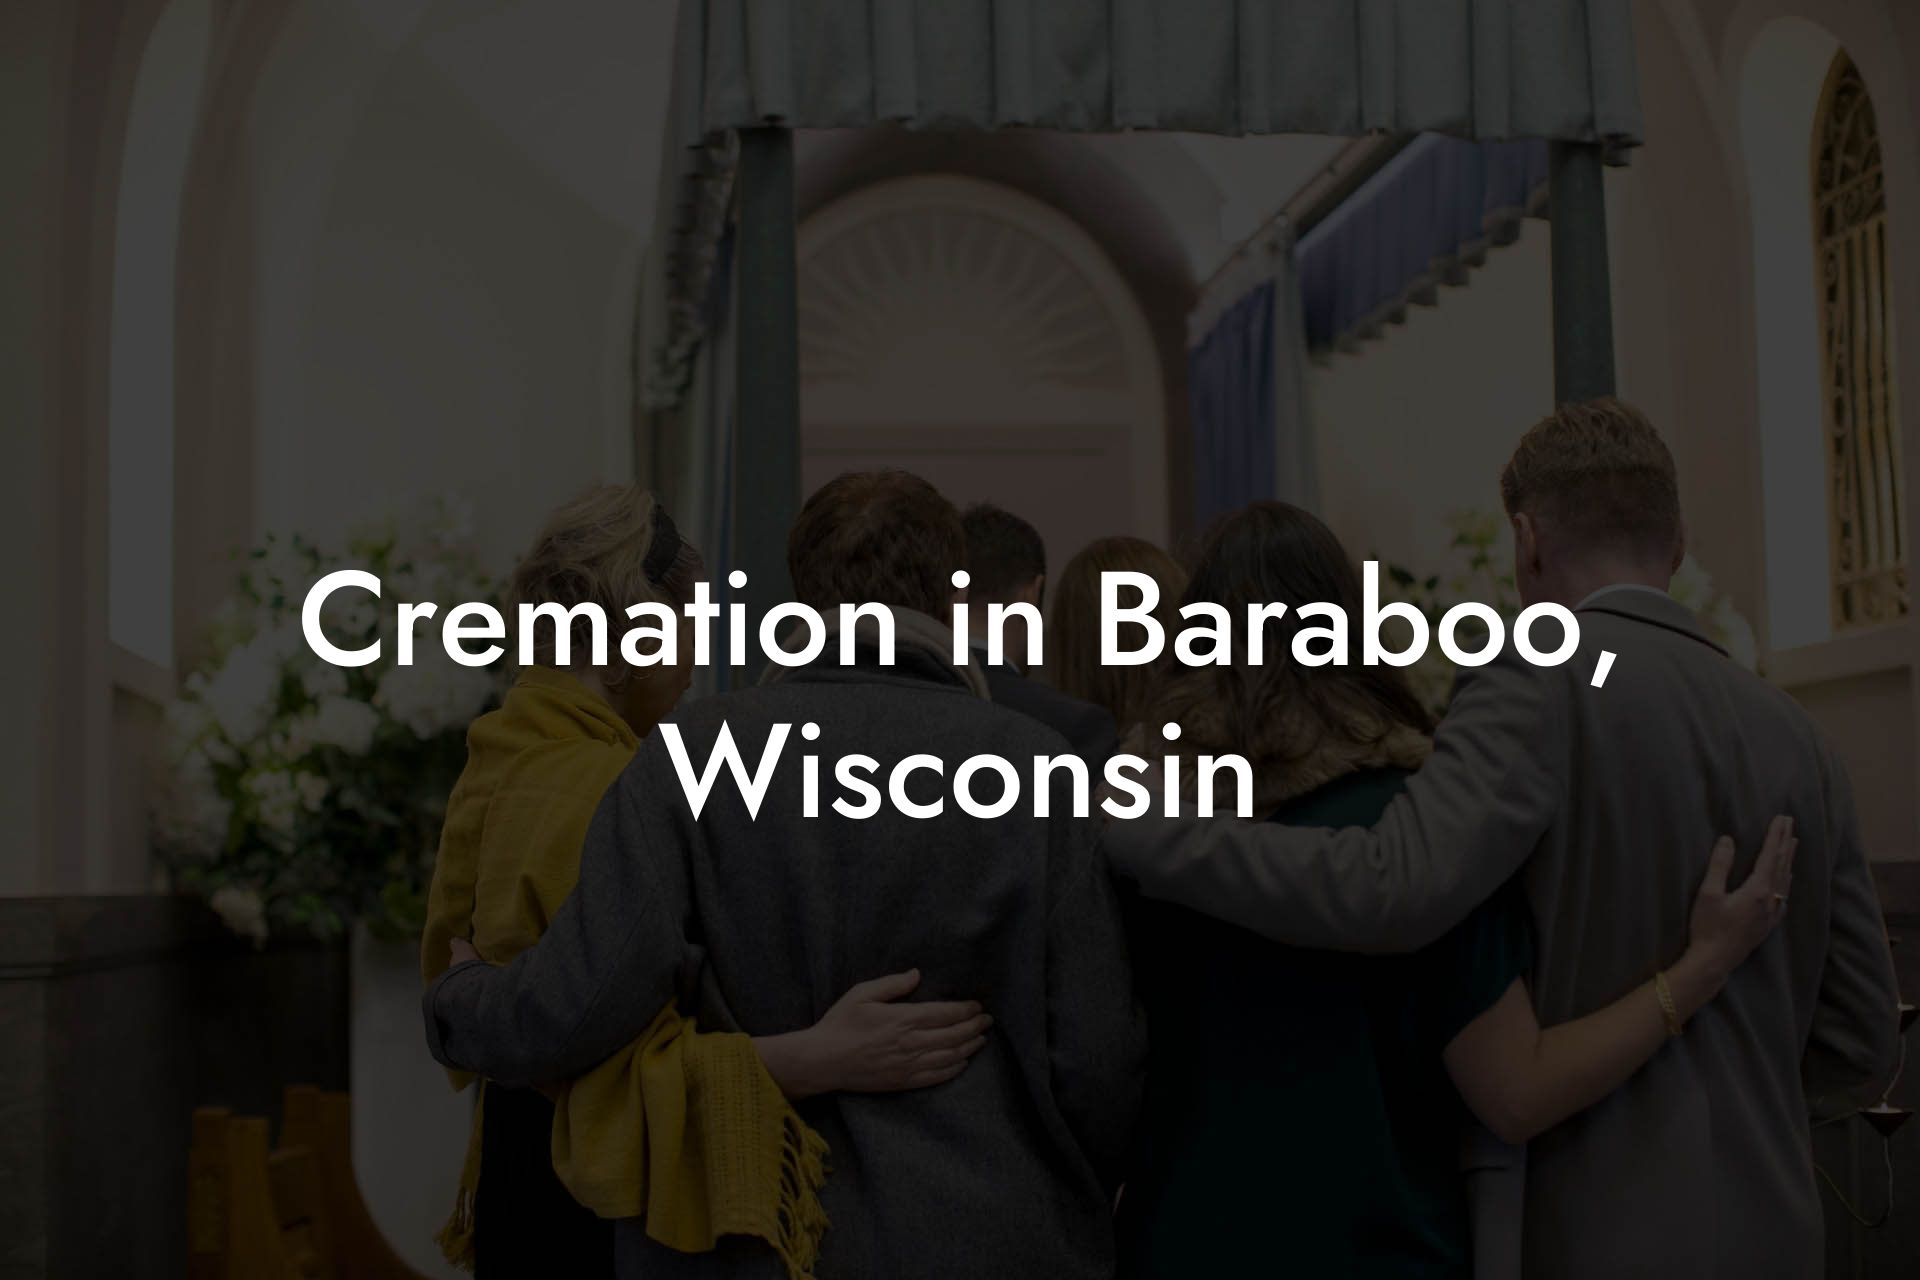 Cremation in Baraboo, Wisconsin